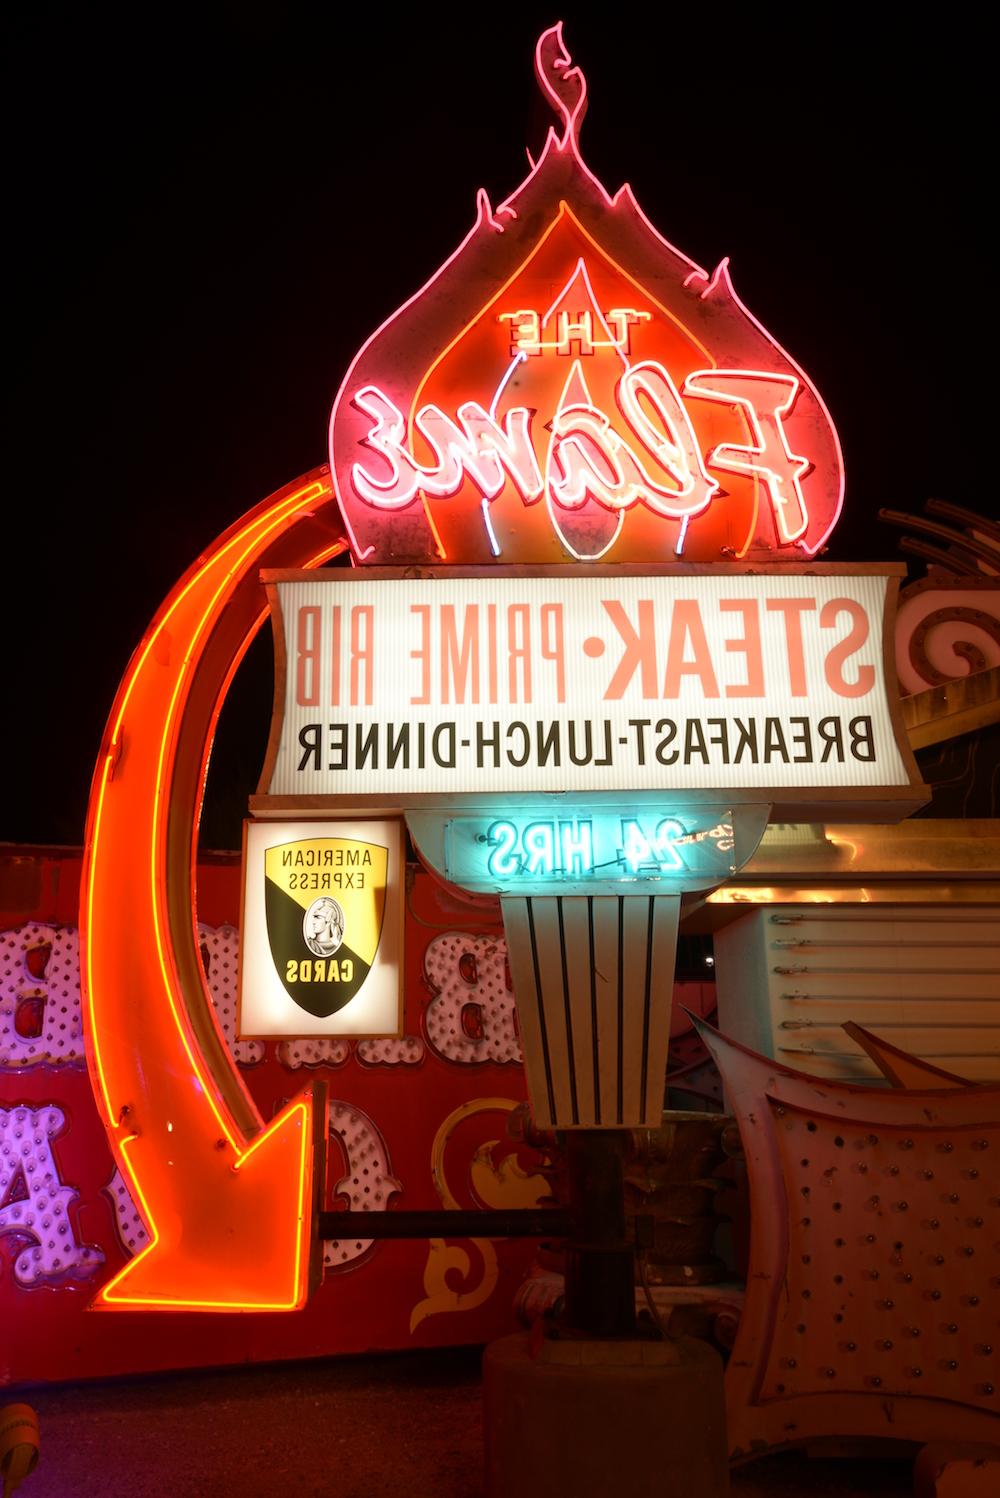 The Flame neon sign at The Neon Museum